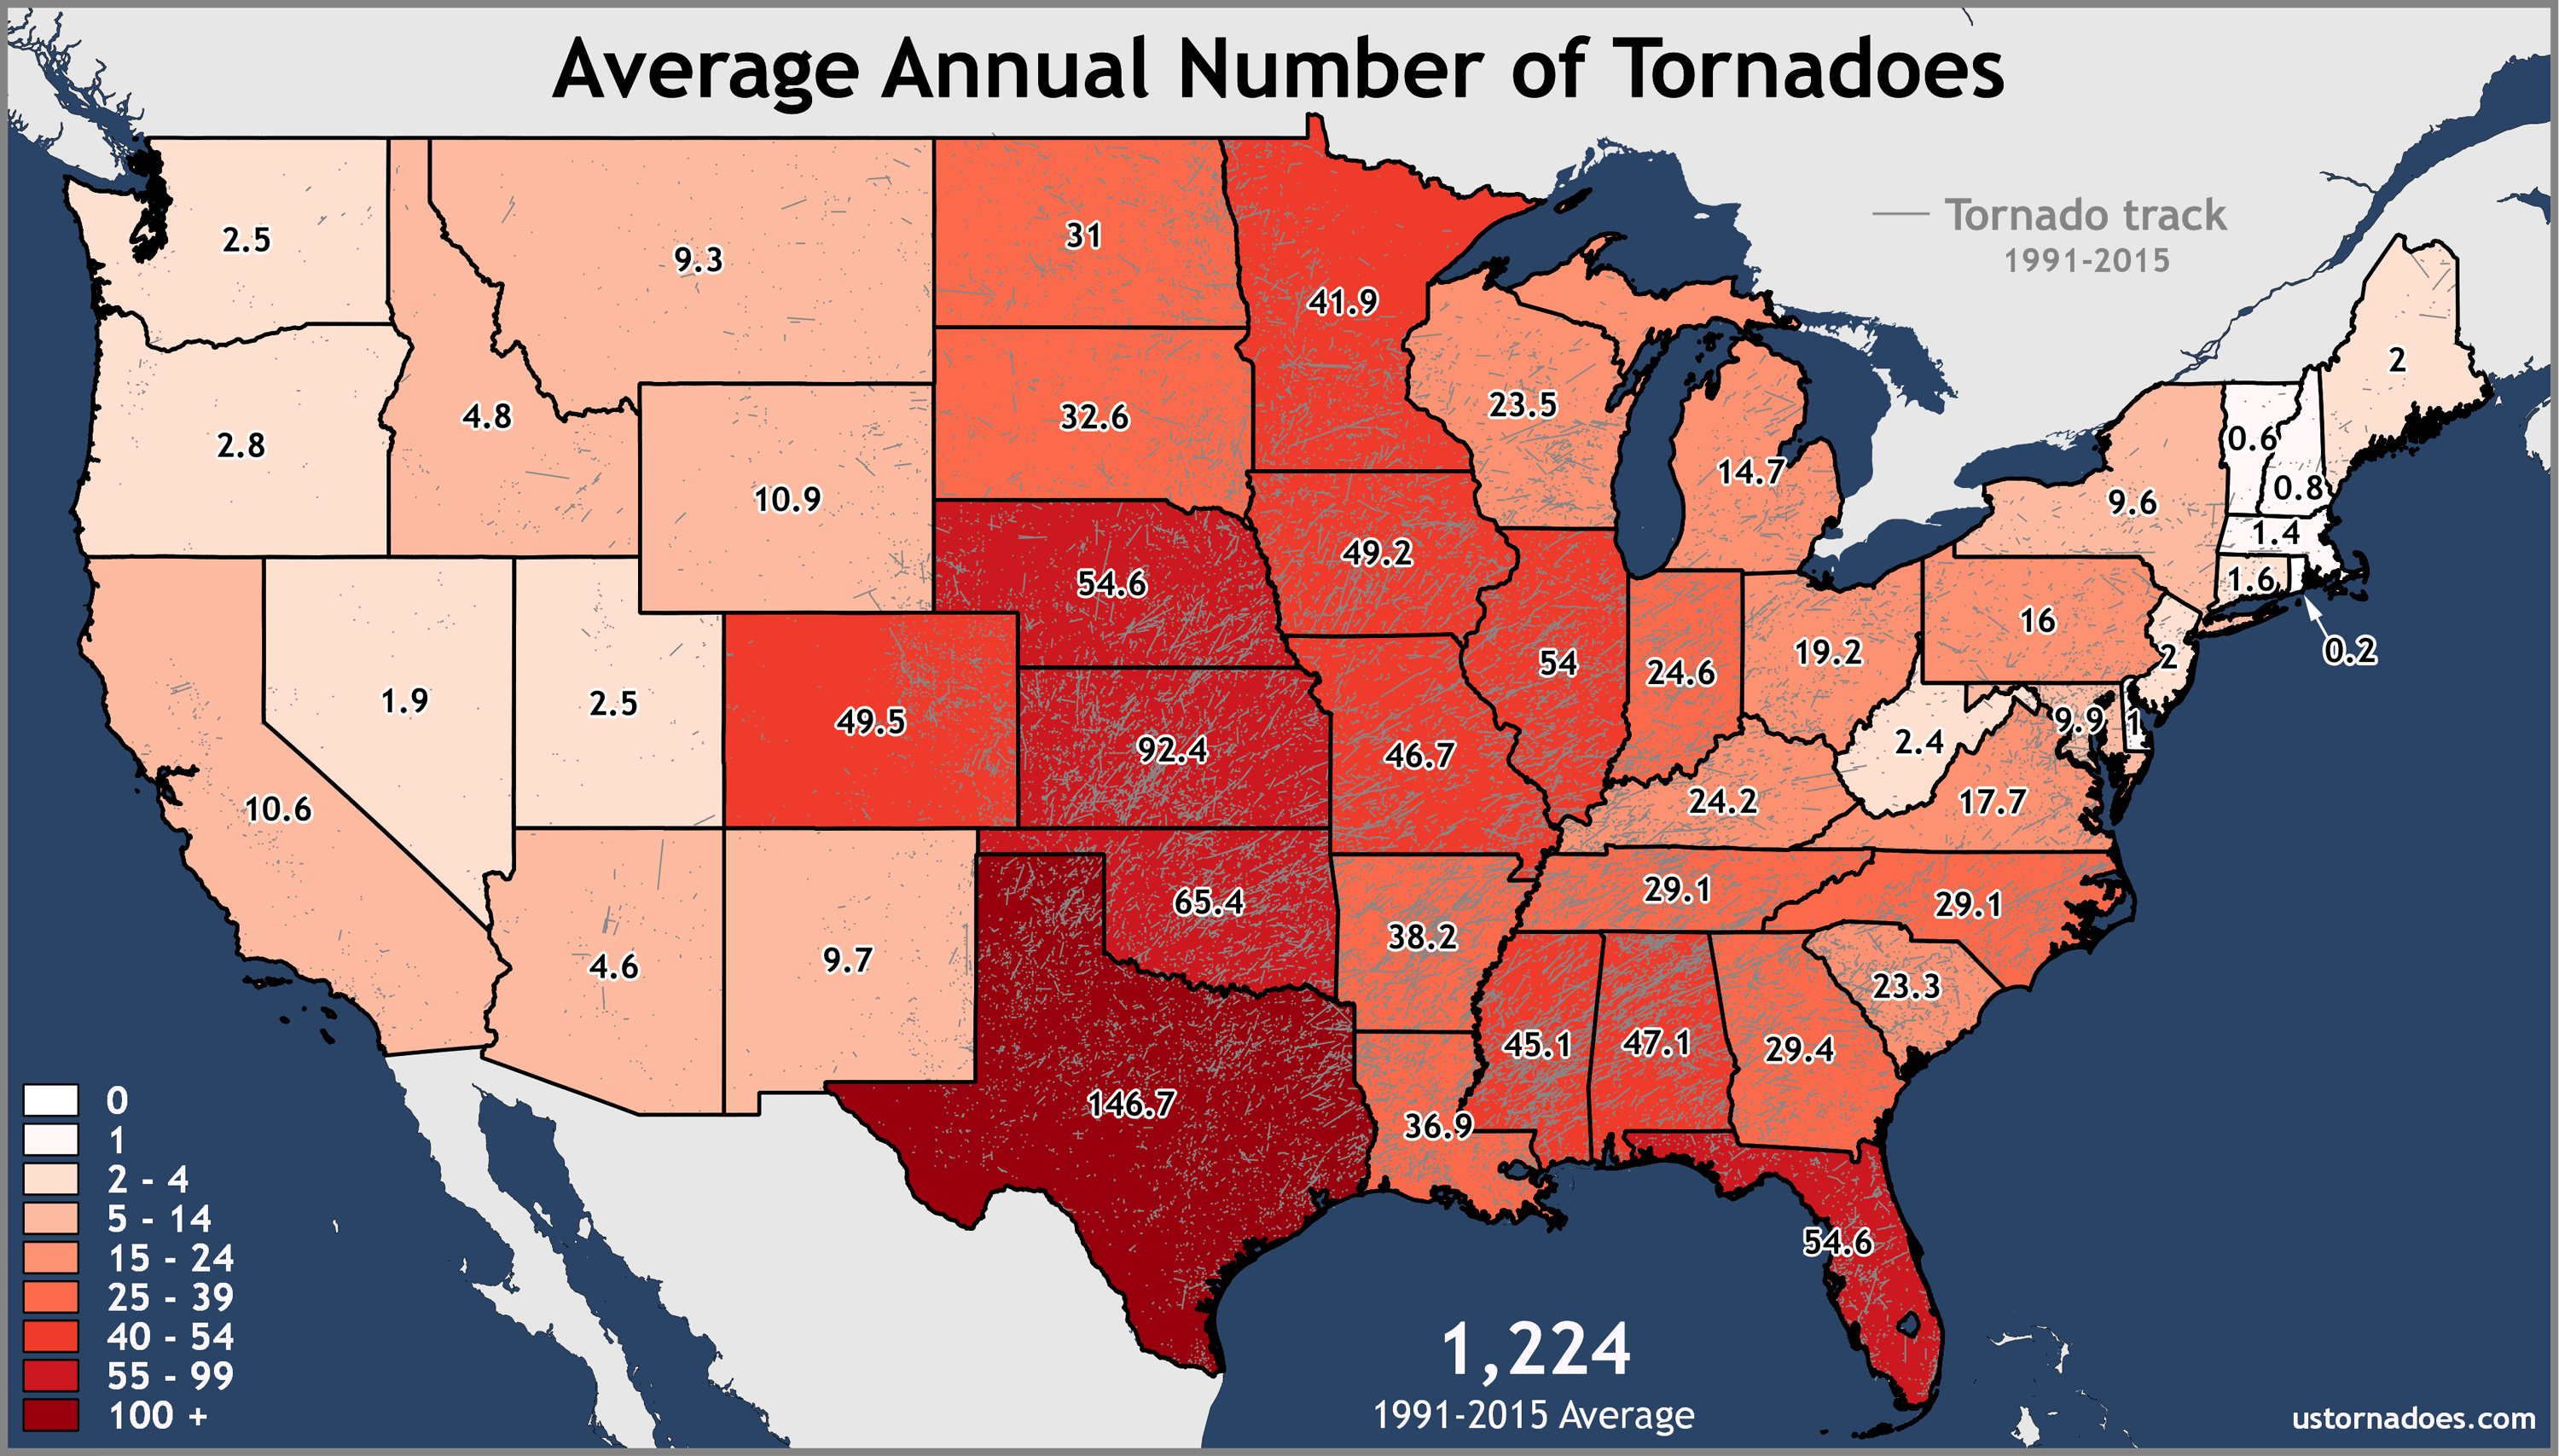 tornadoes states united state annual averages tornado hit map maps oklahoma most average which texas florida recent each kansas 1991